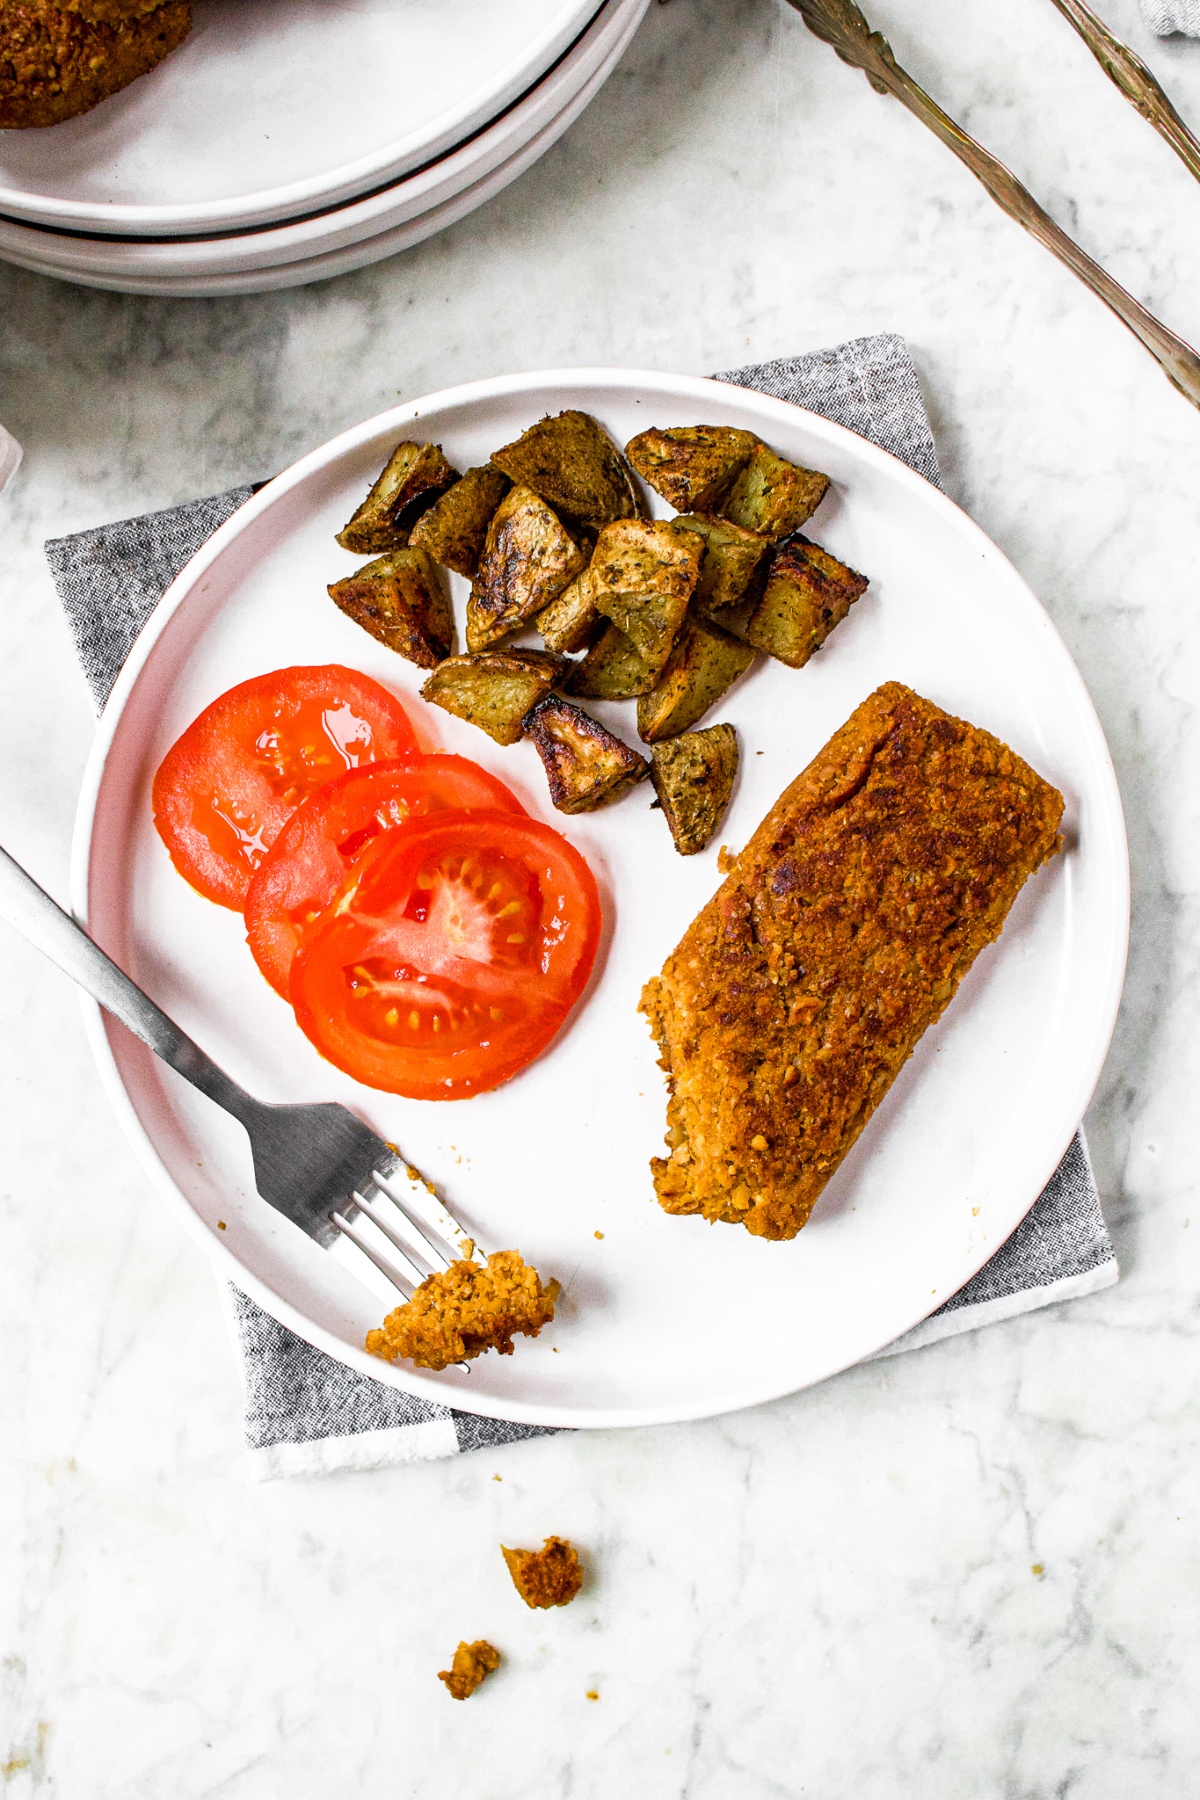 Overhead photo of a round white plate on a black and white plaid linen with a sliced tomato, roasted potatoes, and vegan scrapple made from walnuts on it. A fork is leaning on the plate with a piece of the vegetarian scrapple on it.